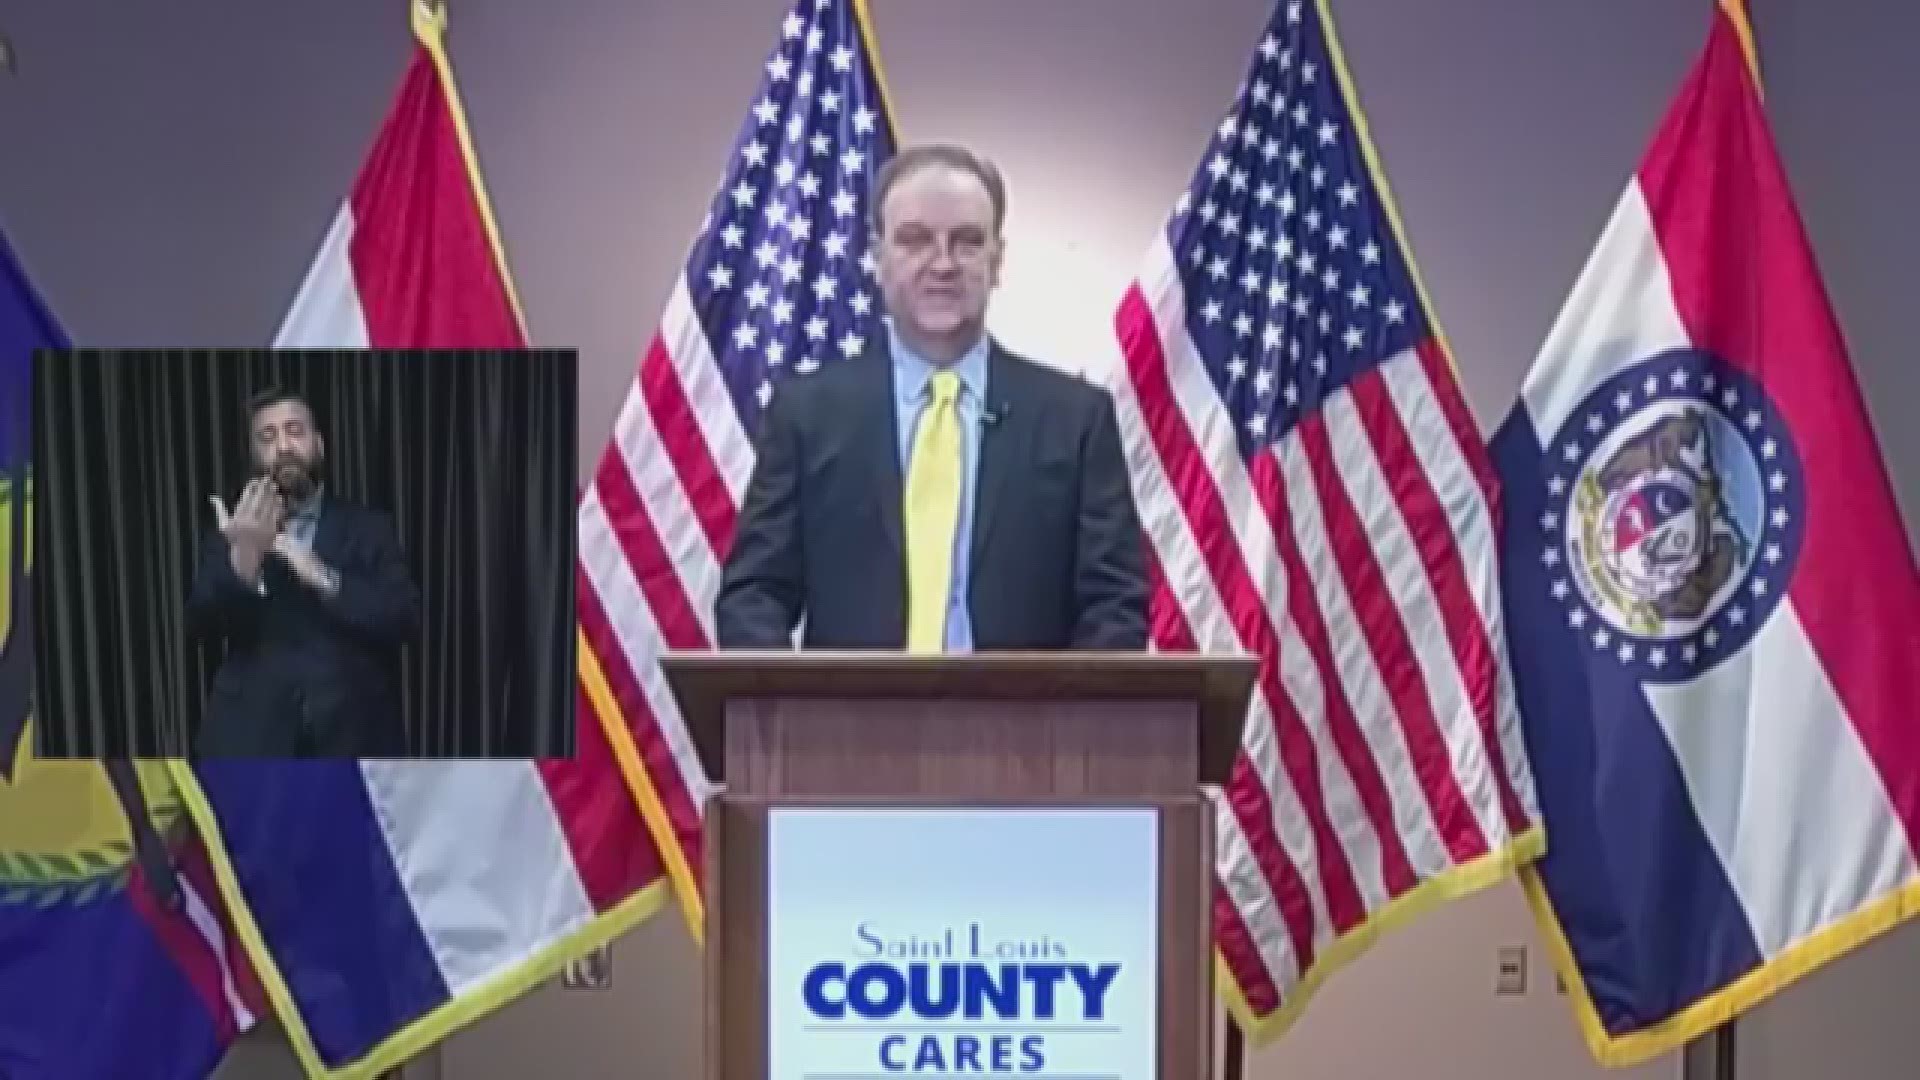 St. Louis County Executive Sam Page made the announcement during a briefing Wednesday